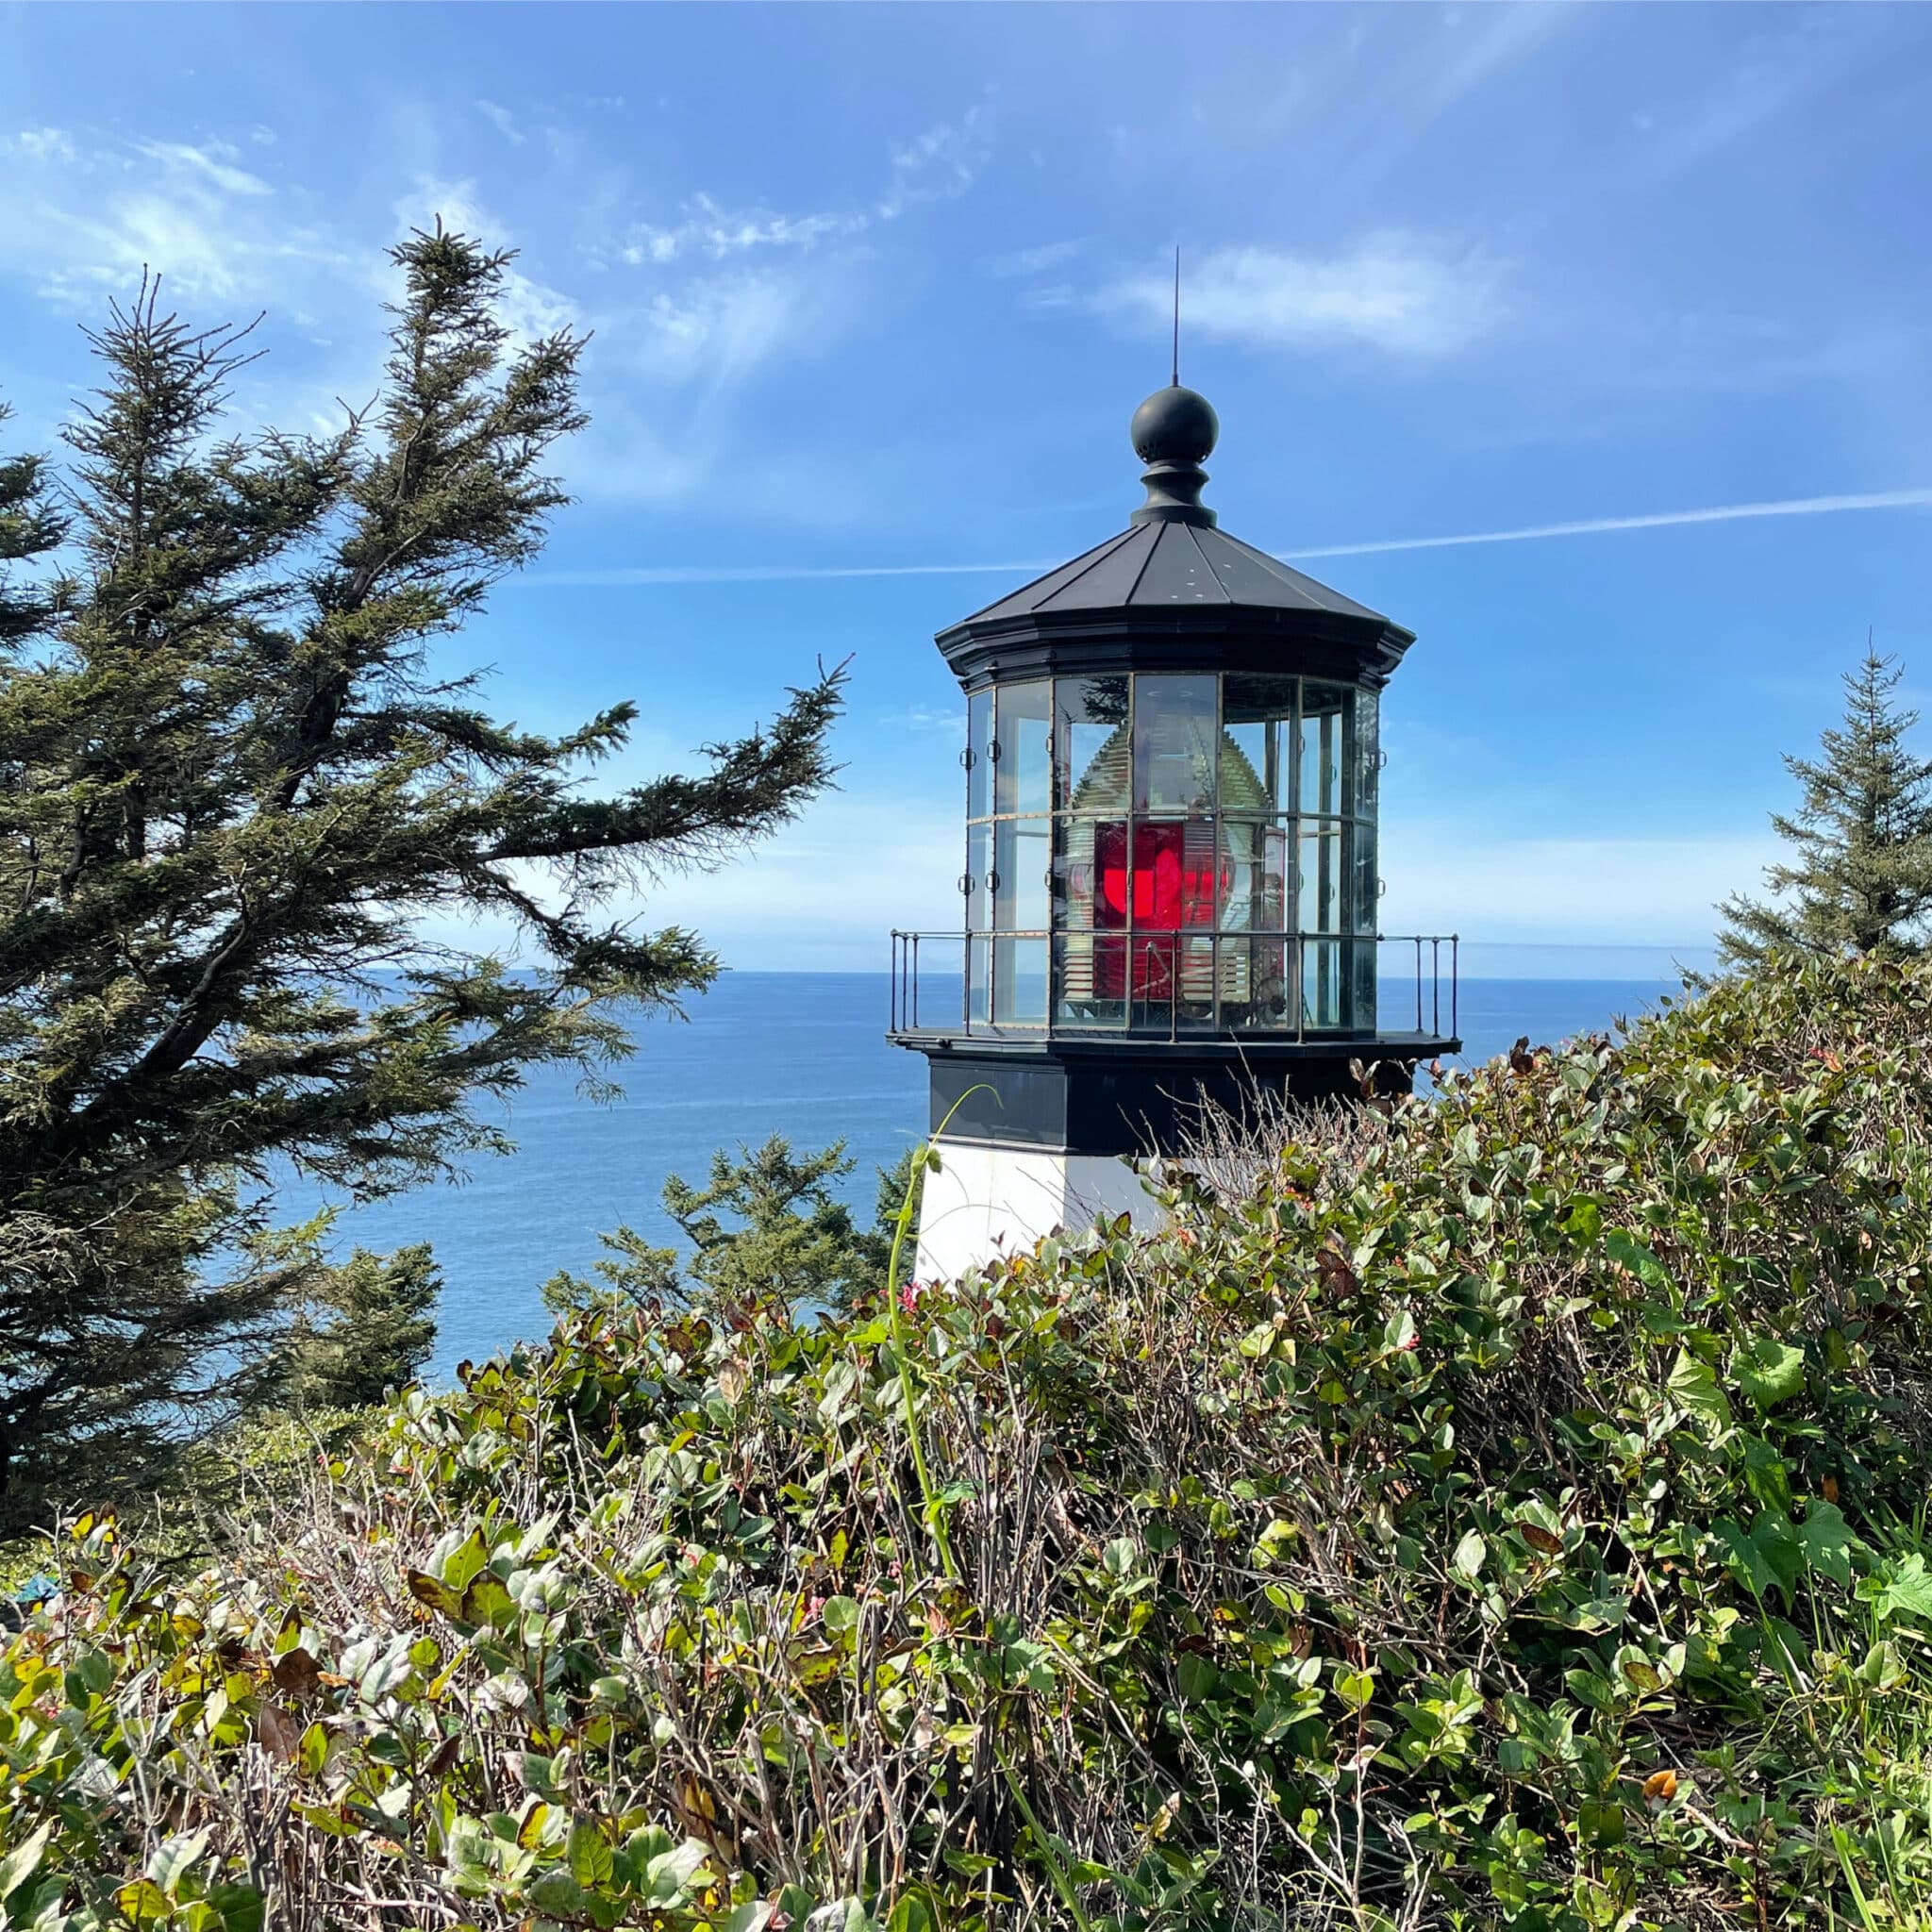 Cape Meares Lighthouse on the Oregon Coast with an Ocean View